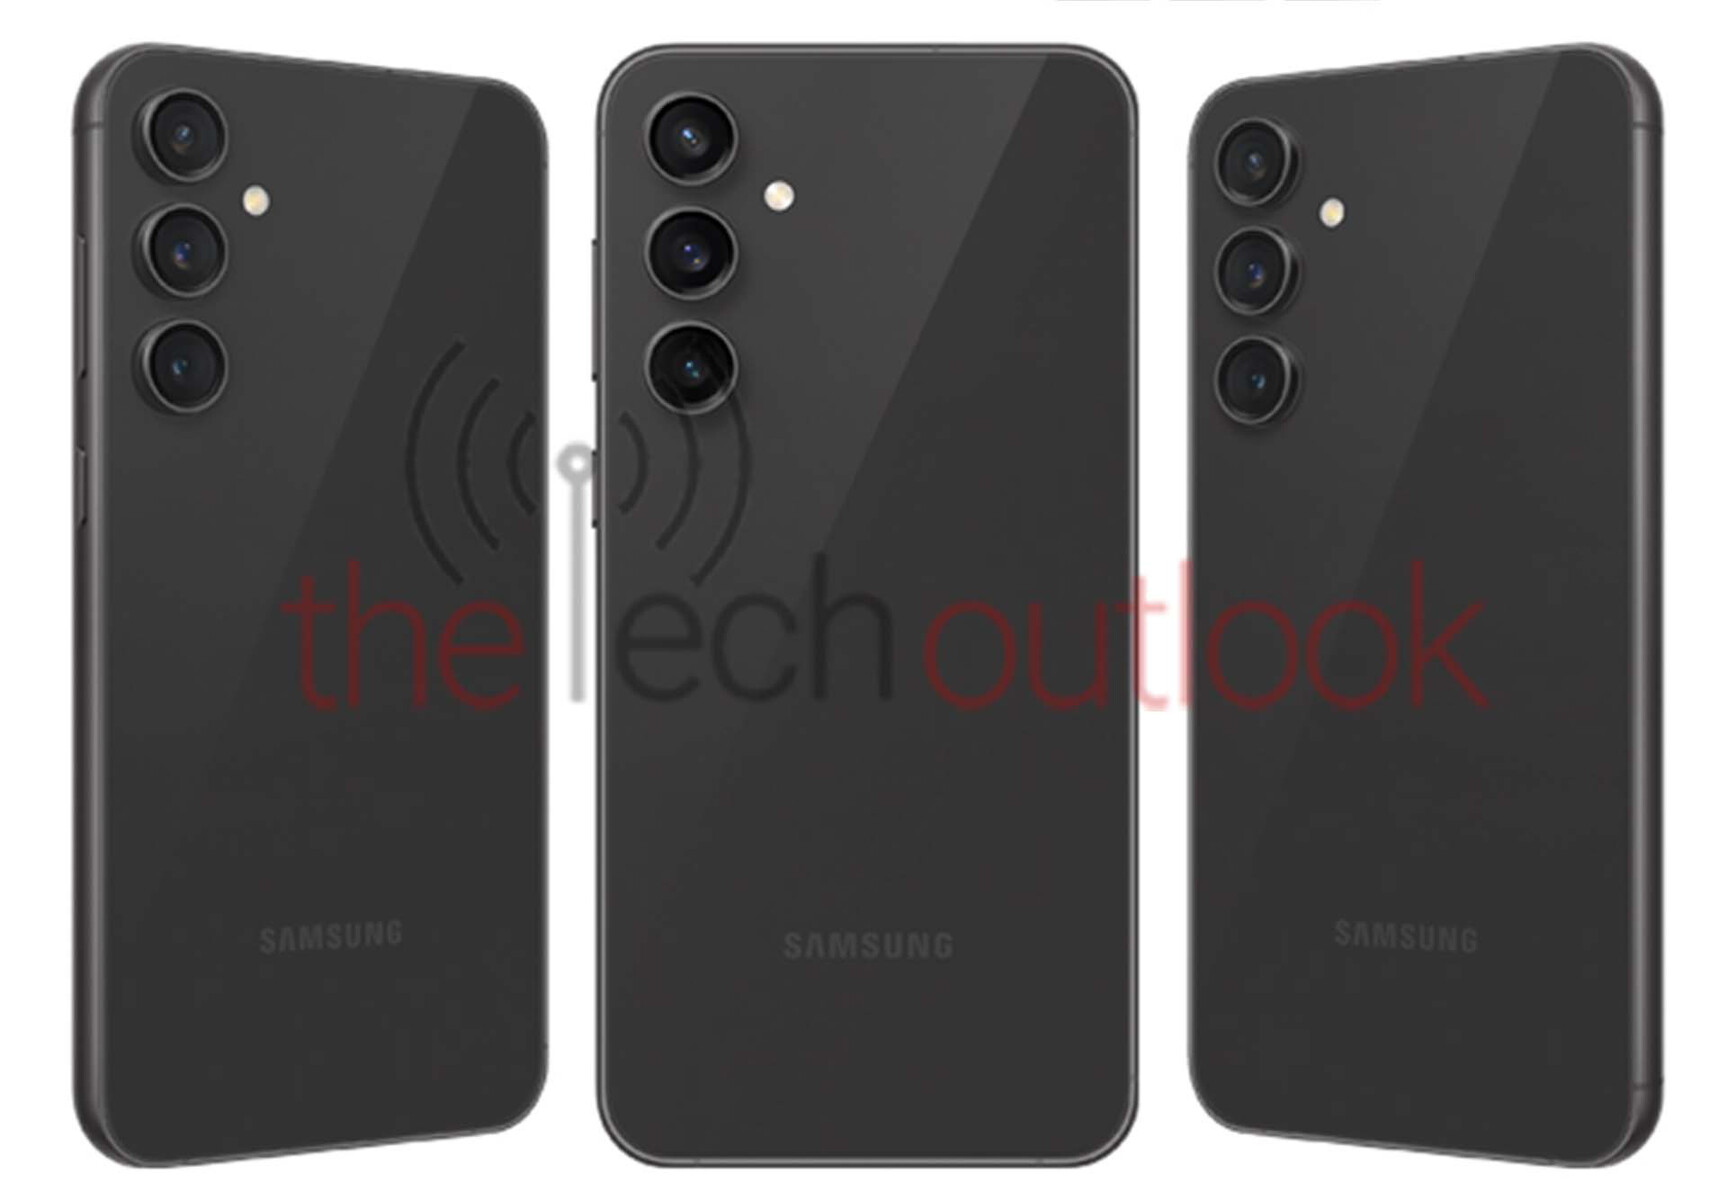 Galaxy S23 FE is official, might be Samsung's best non-flagship